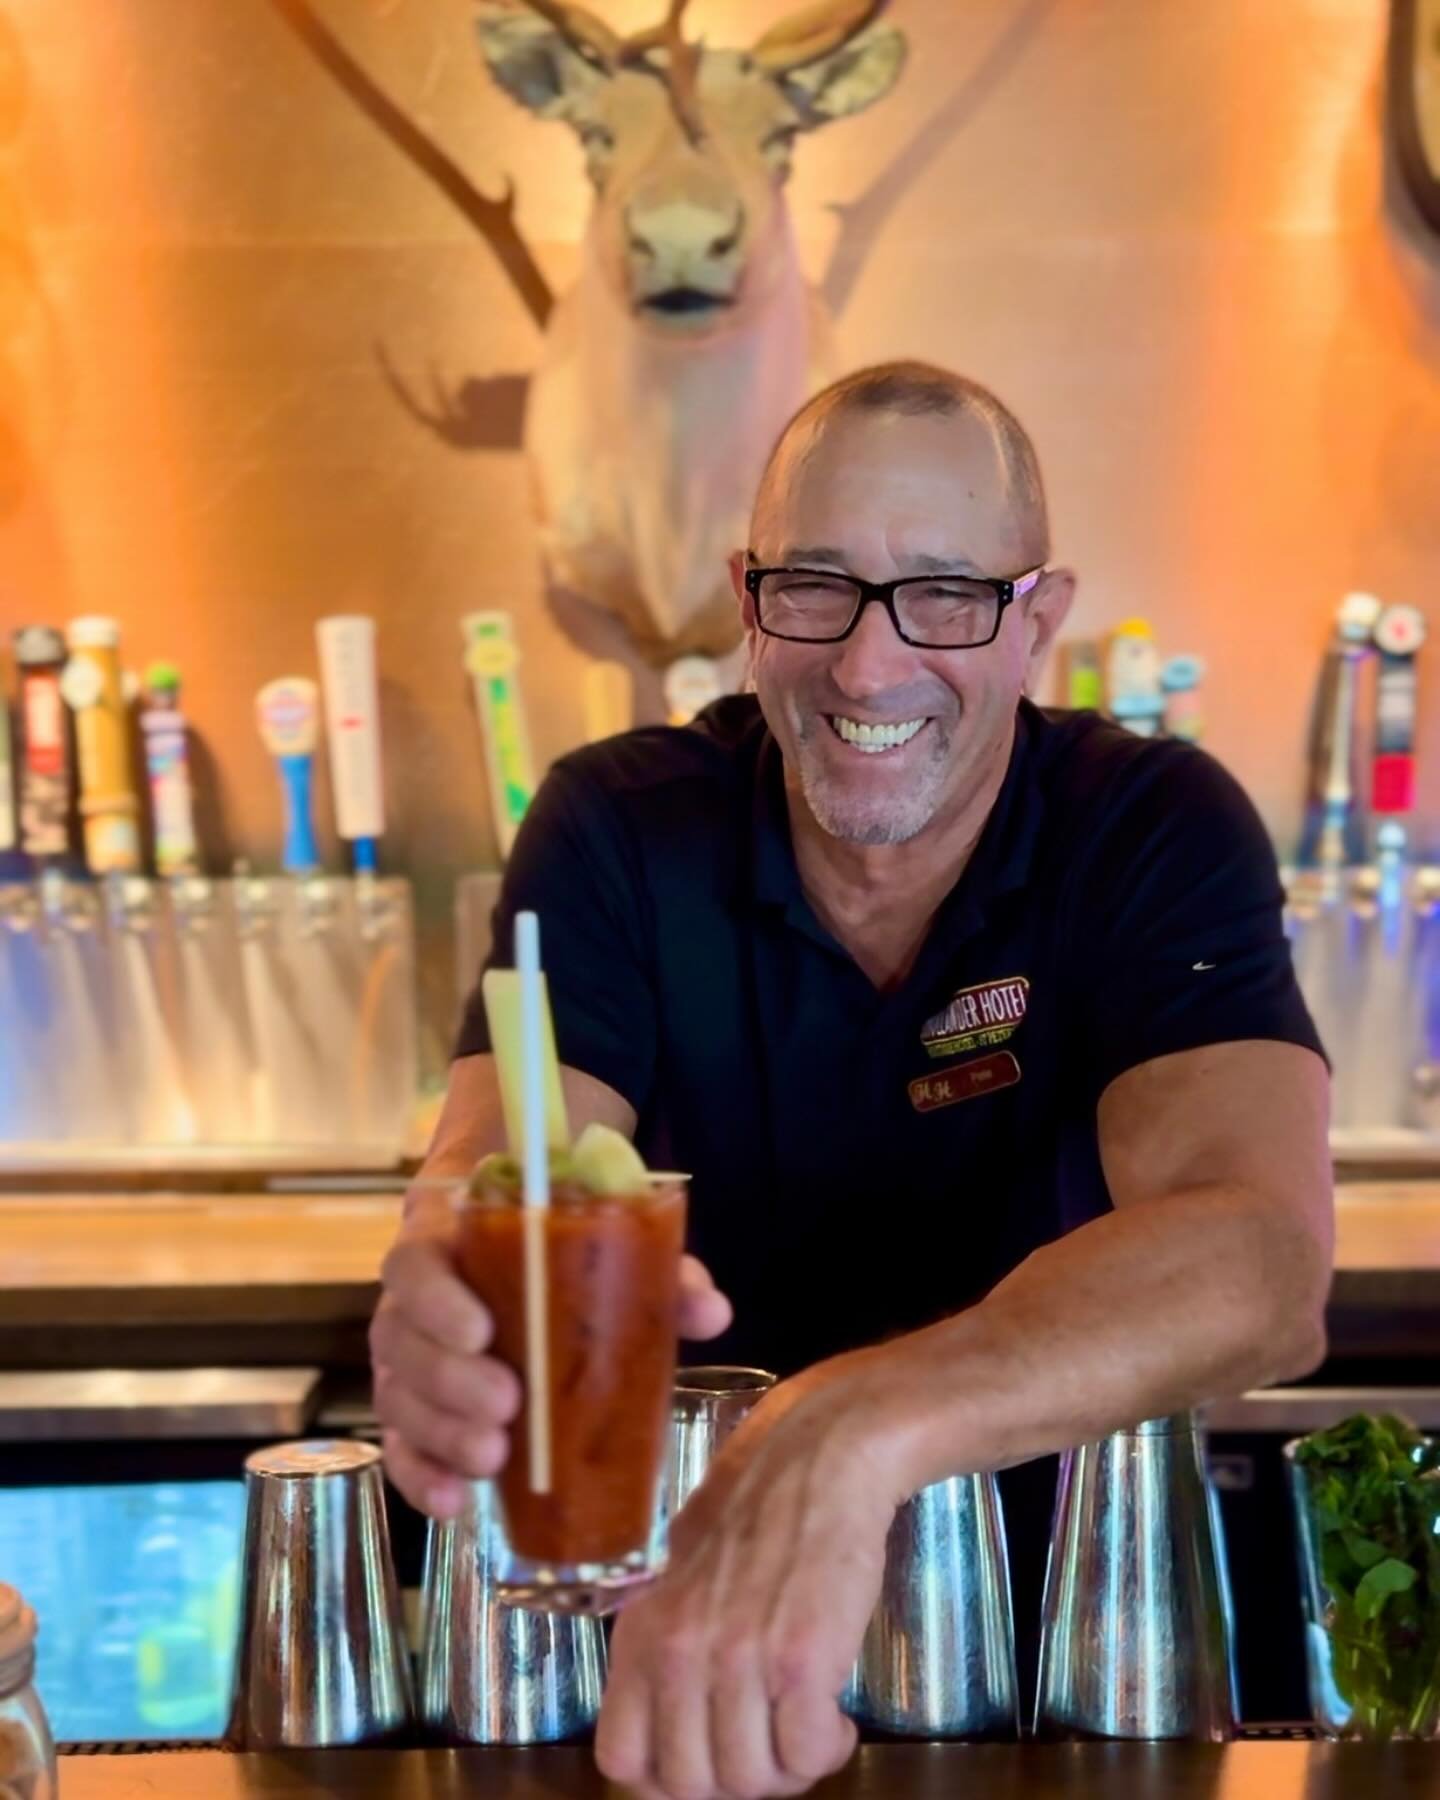 Bloody Mary&rsquo;s all day with this guy😍 Come see Pete!  Serving breakfast 7 days a week❣️

#sundayvibes #happysunday #bloodymary